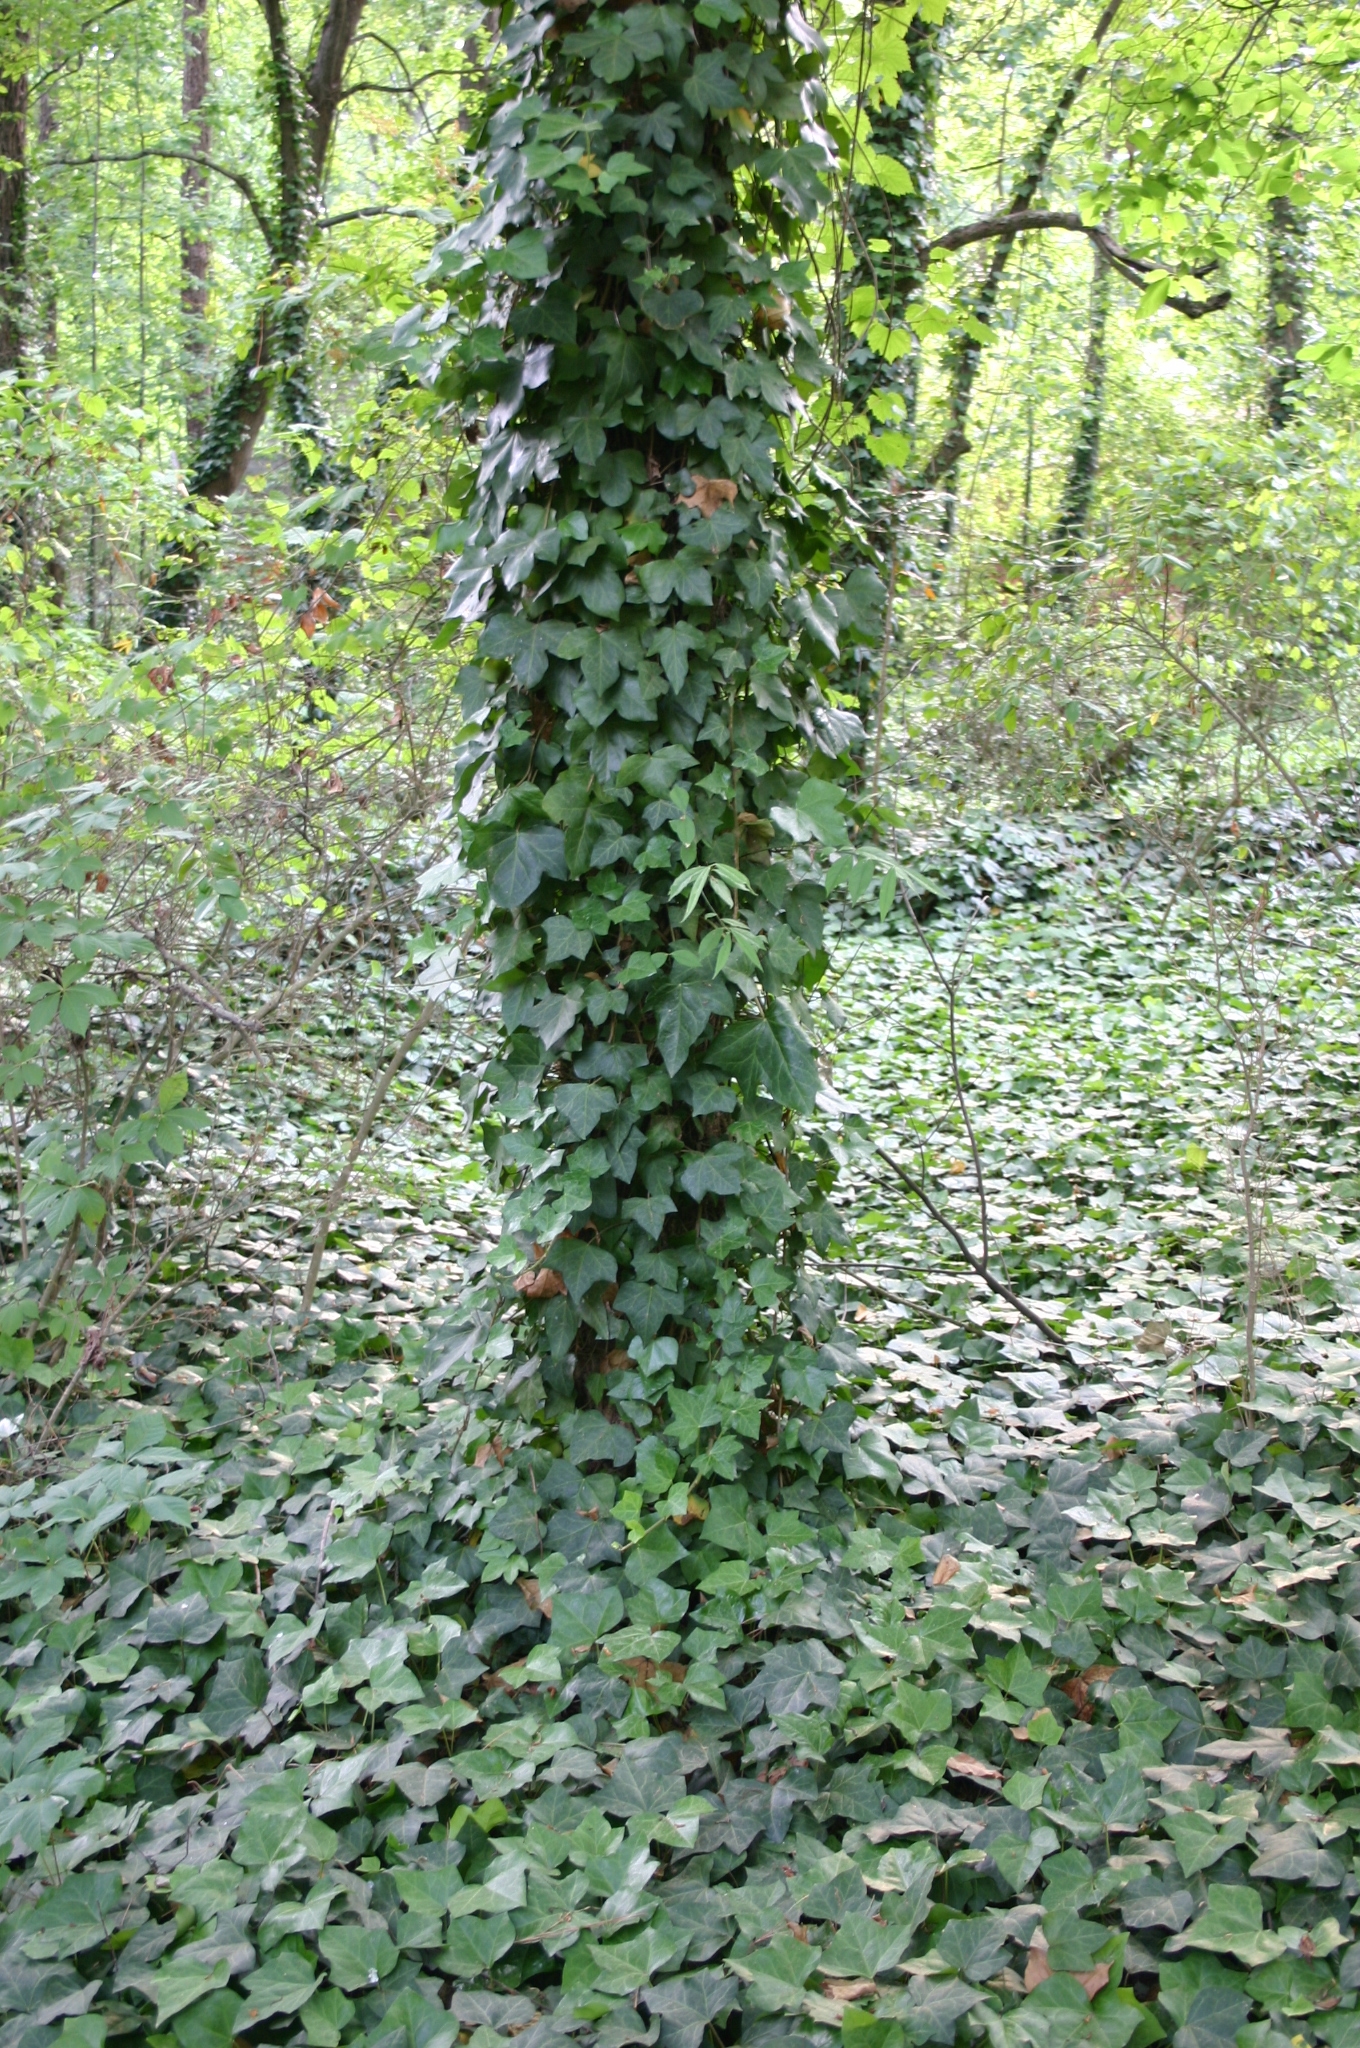 English Ivy covering a tree trunk